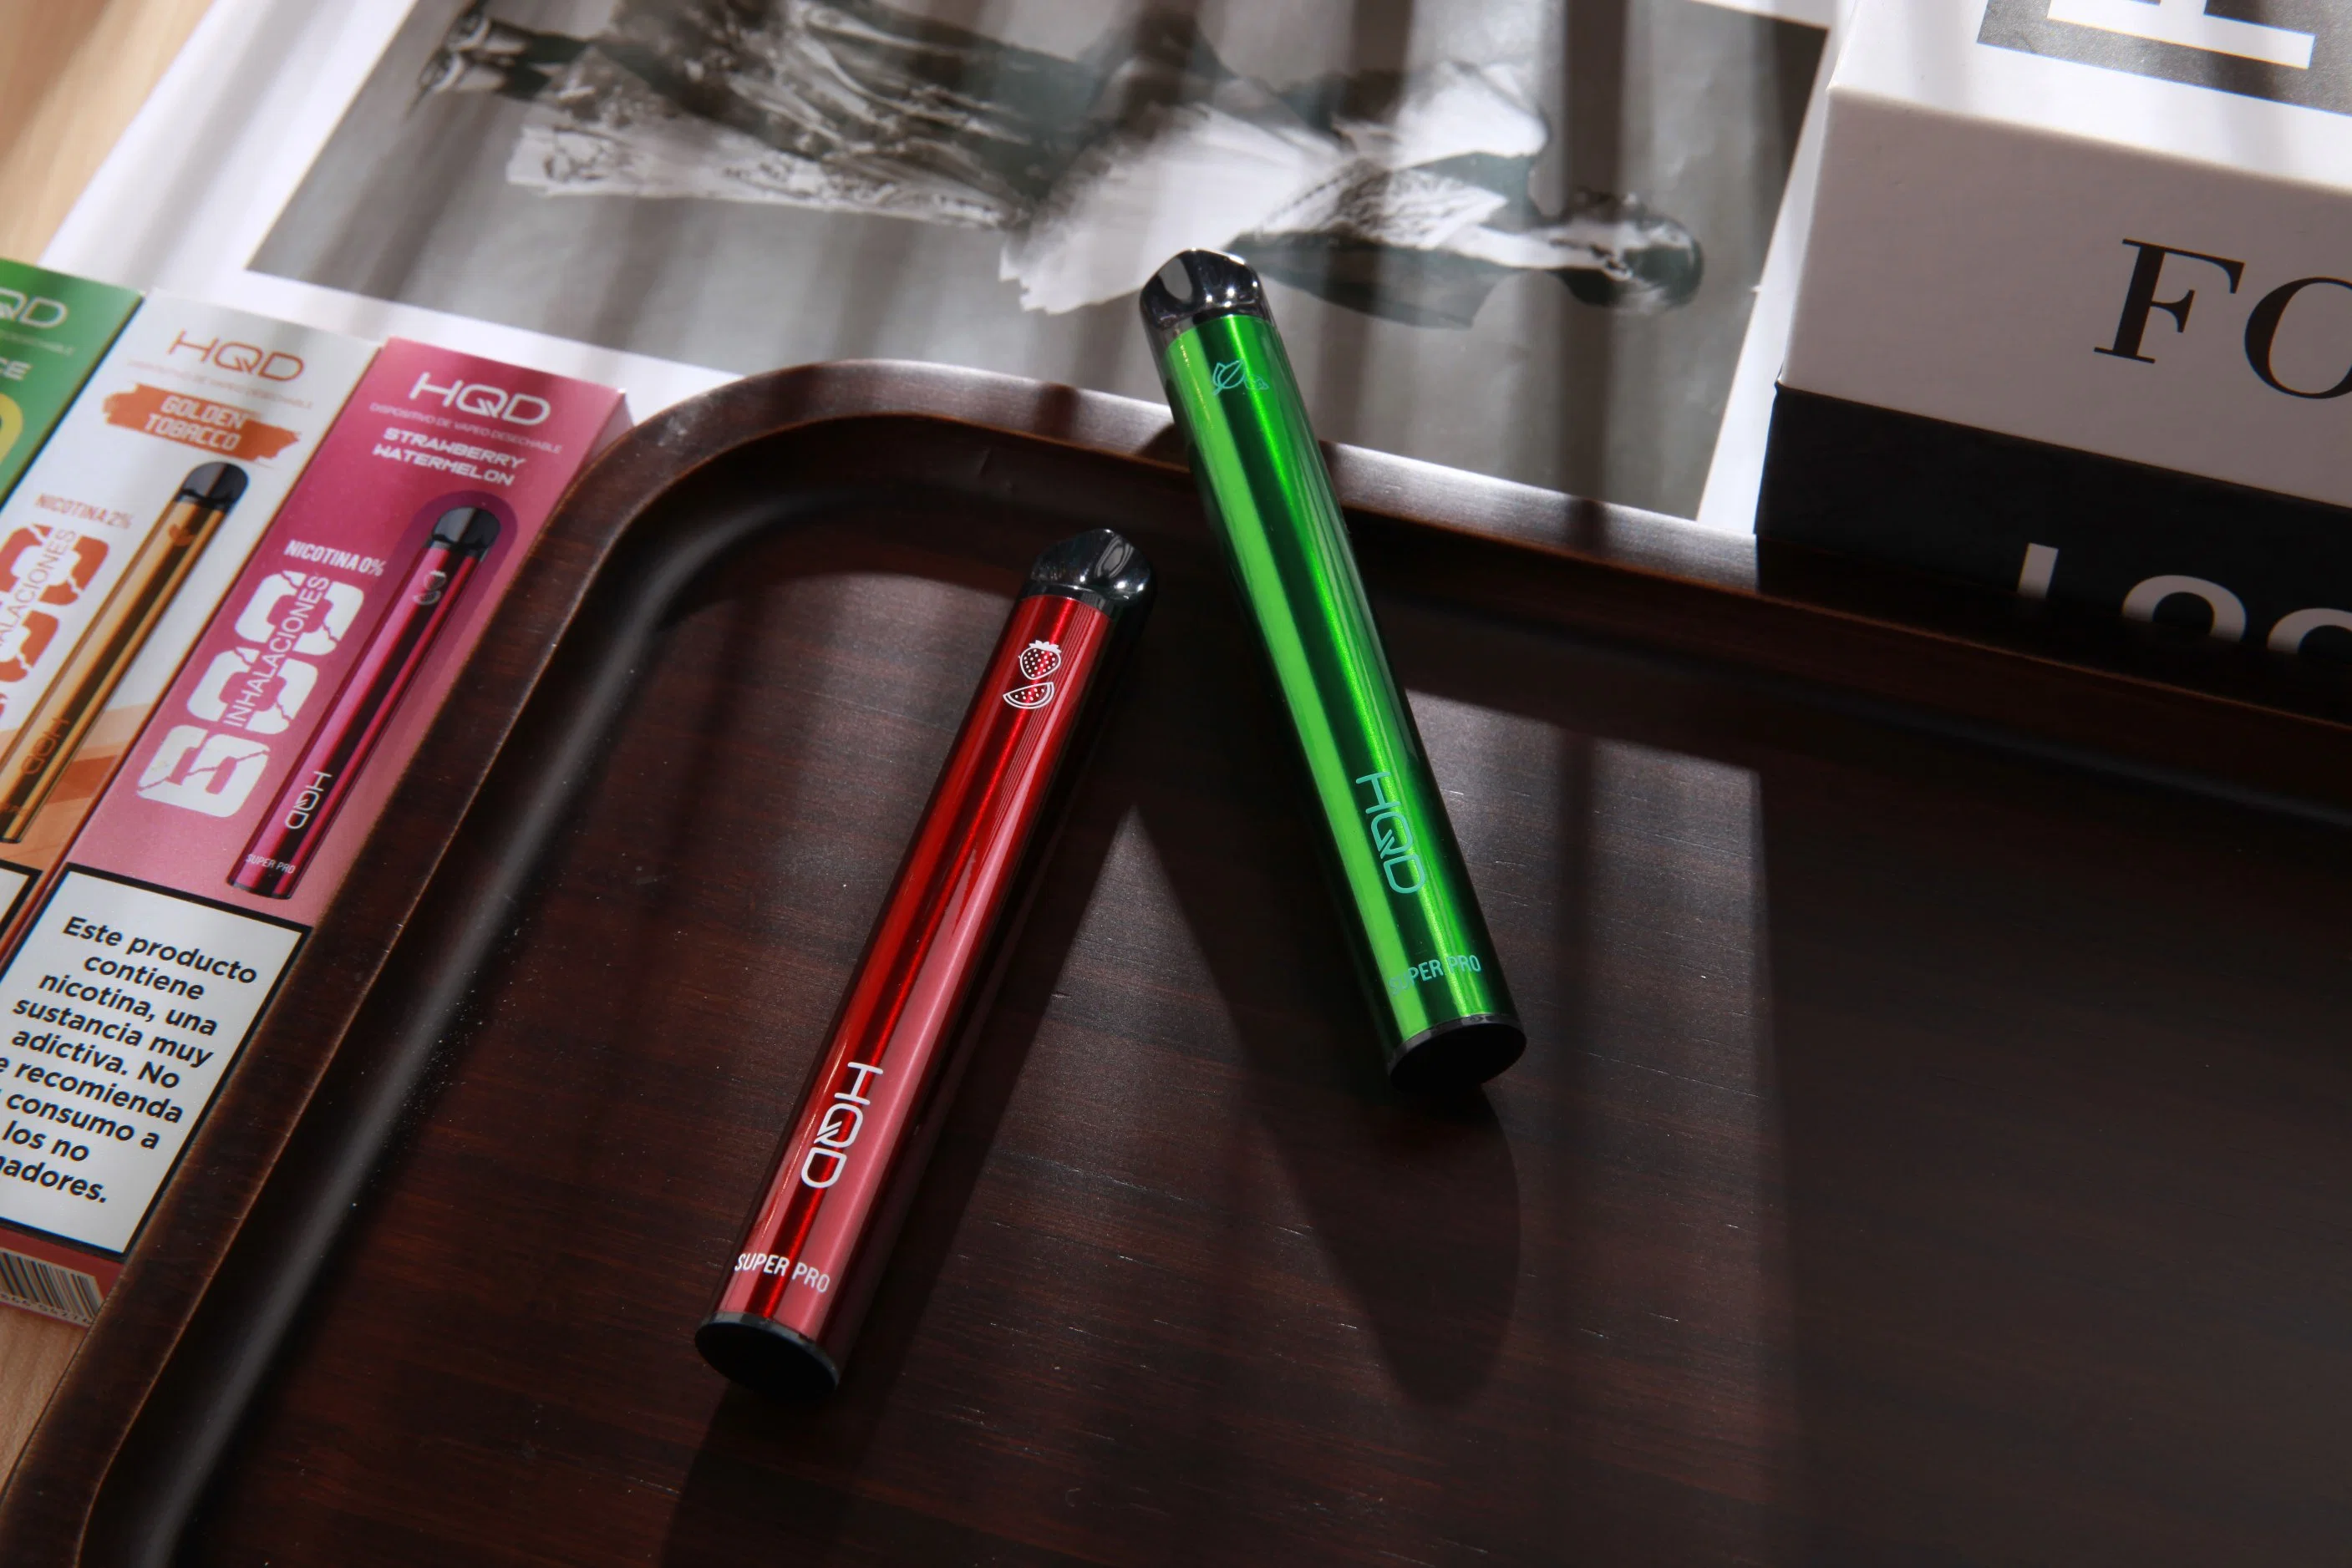 Hqd Top Quality 600puffs Disposable/Chargeable Vape Pod System Super PRO with Tpd Certifaction Gets Popular in Europe